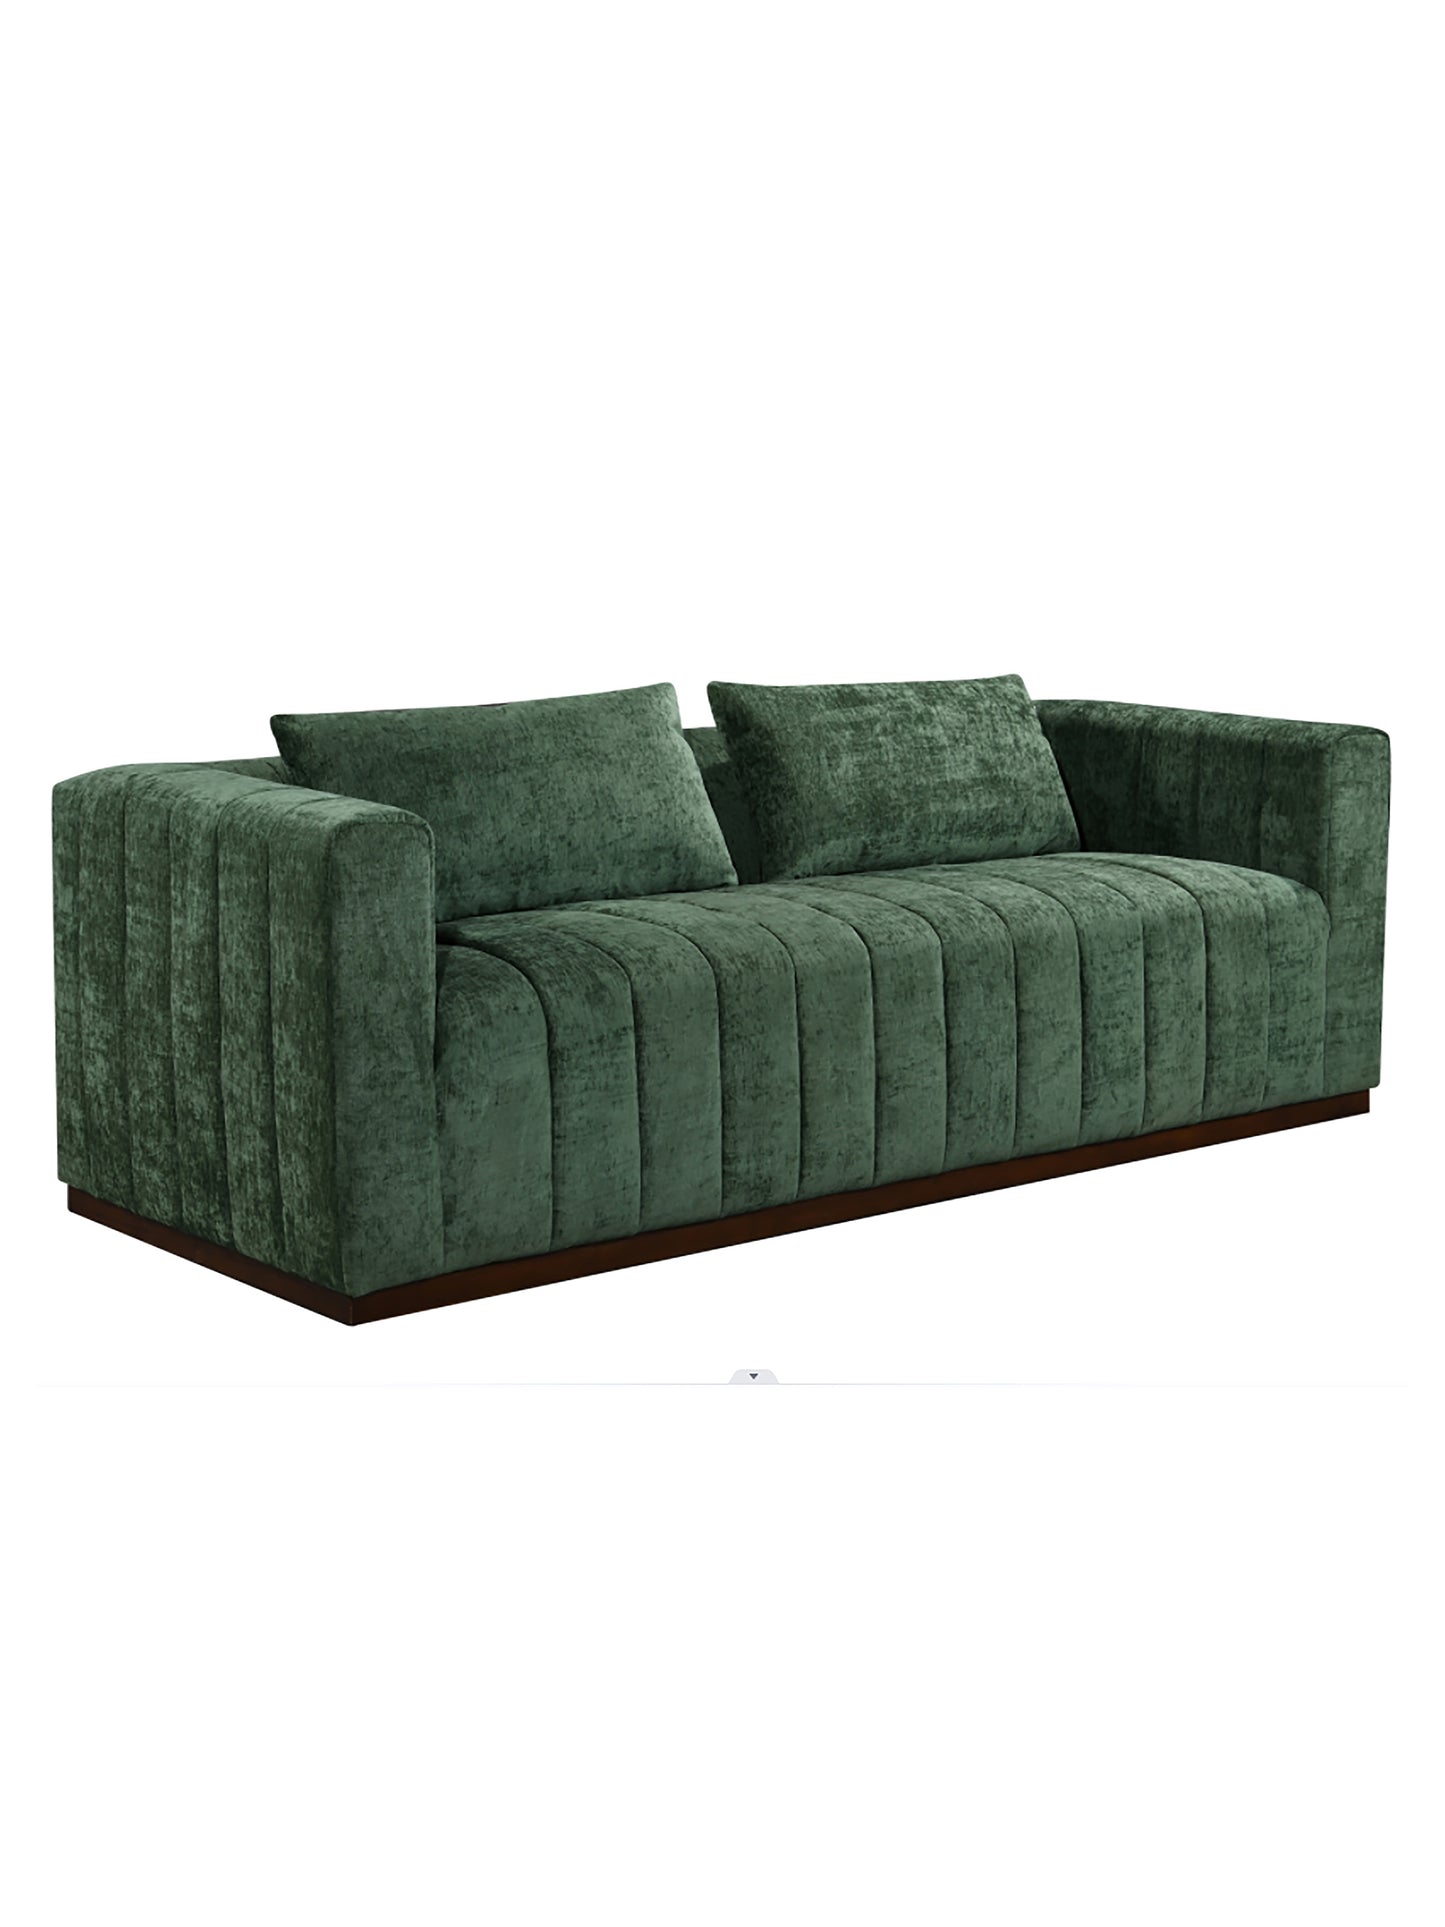 Eclectic Home Sofa Storme Cypress Green